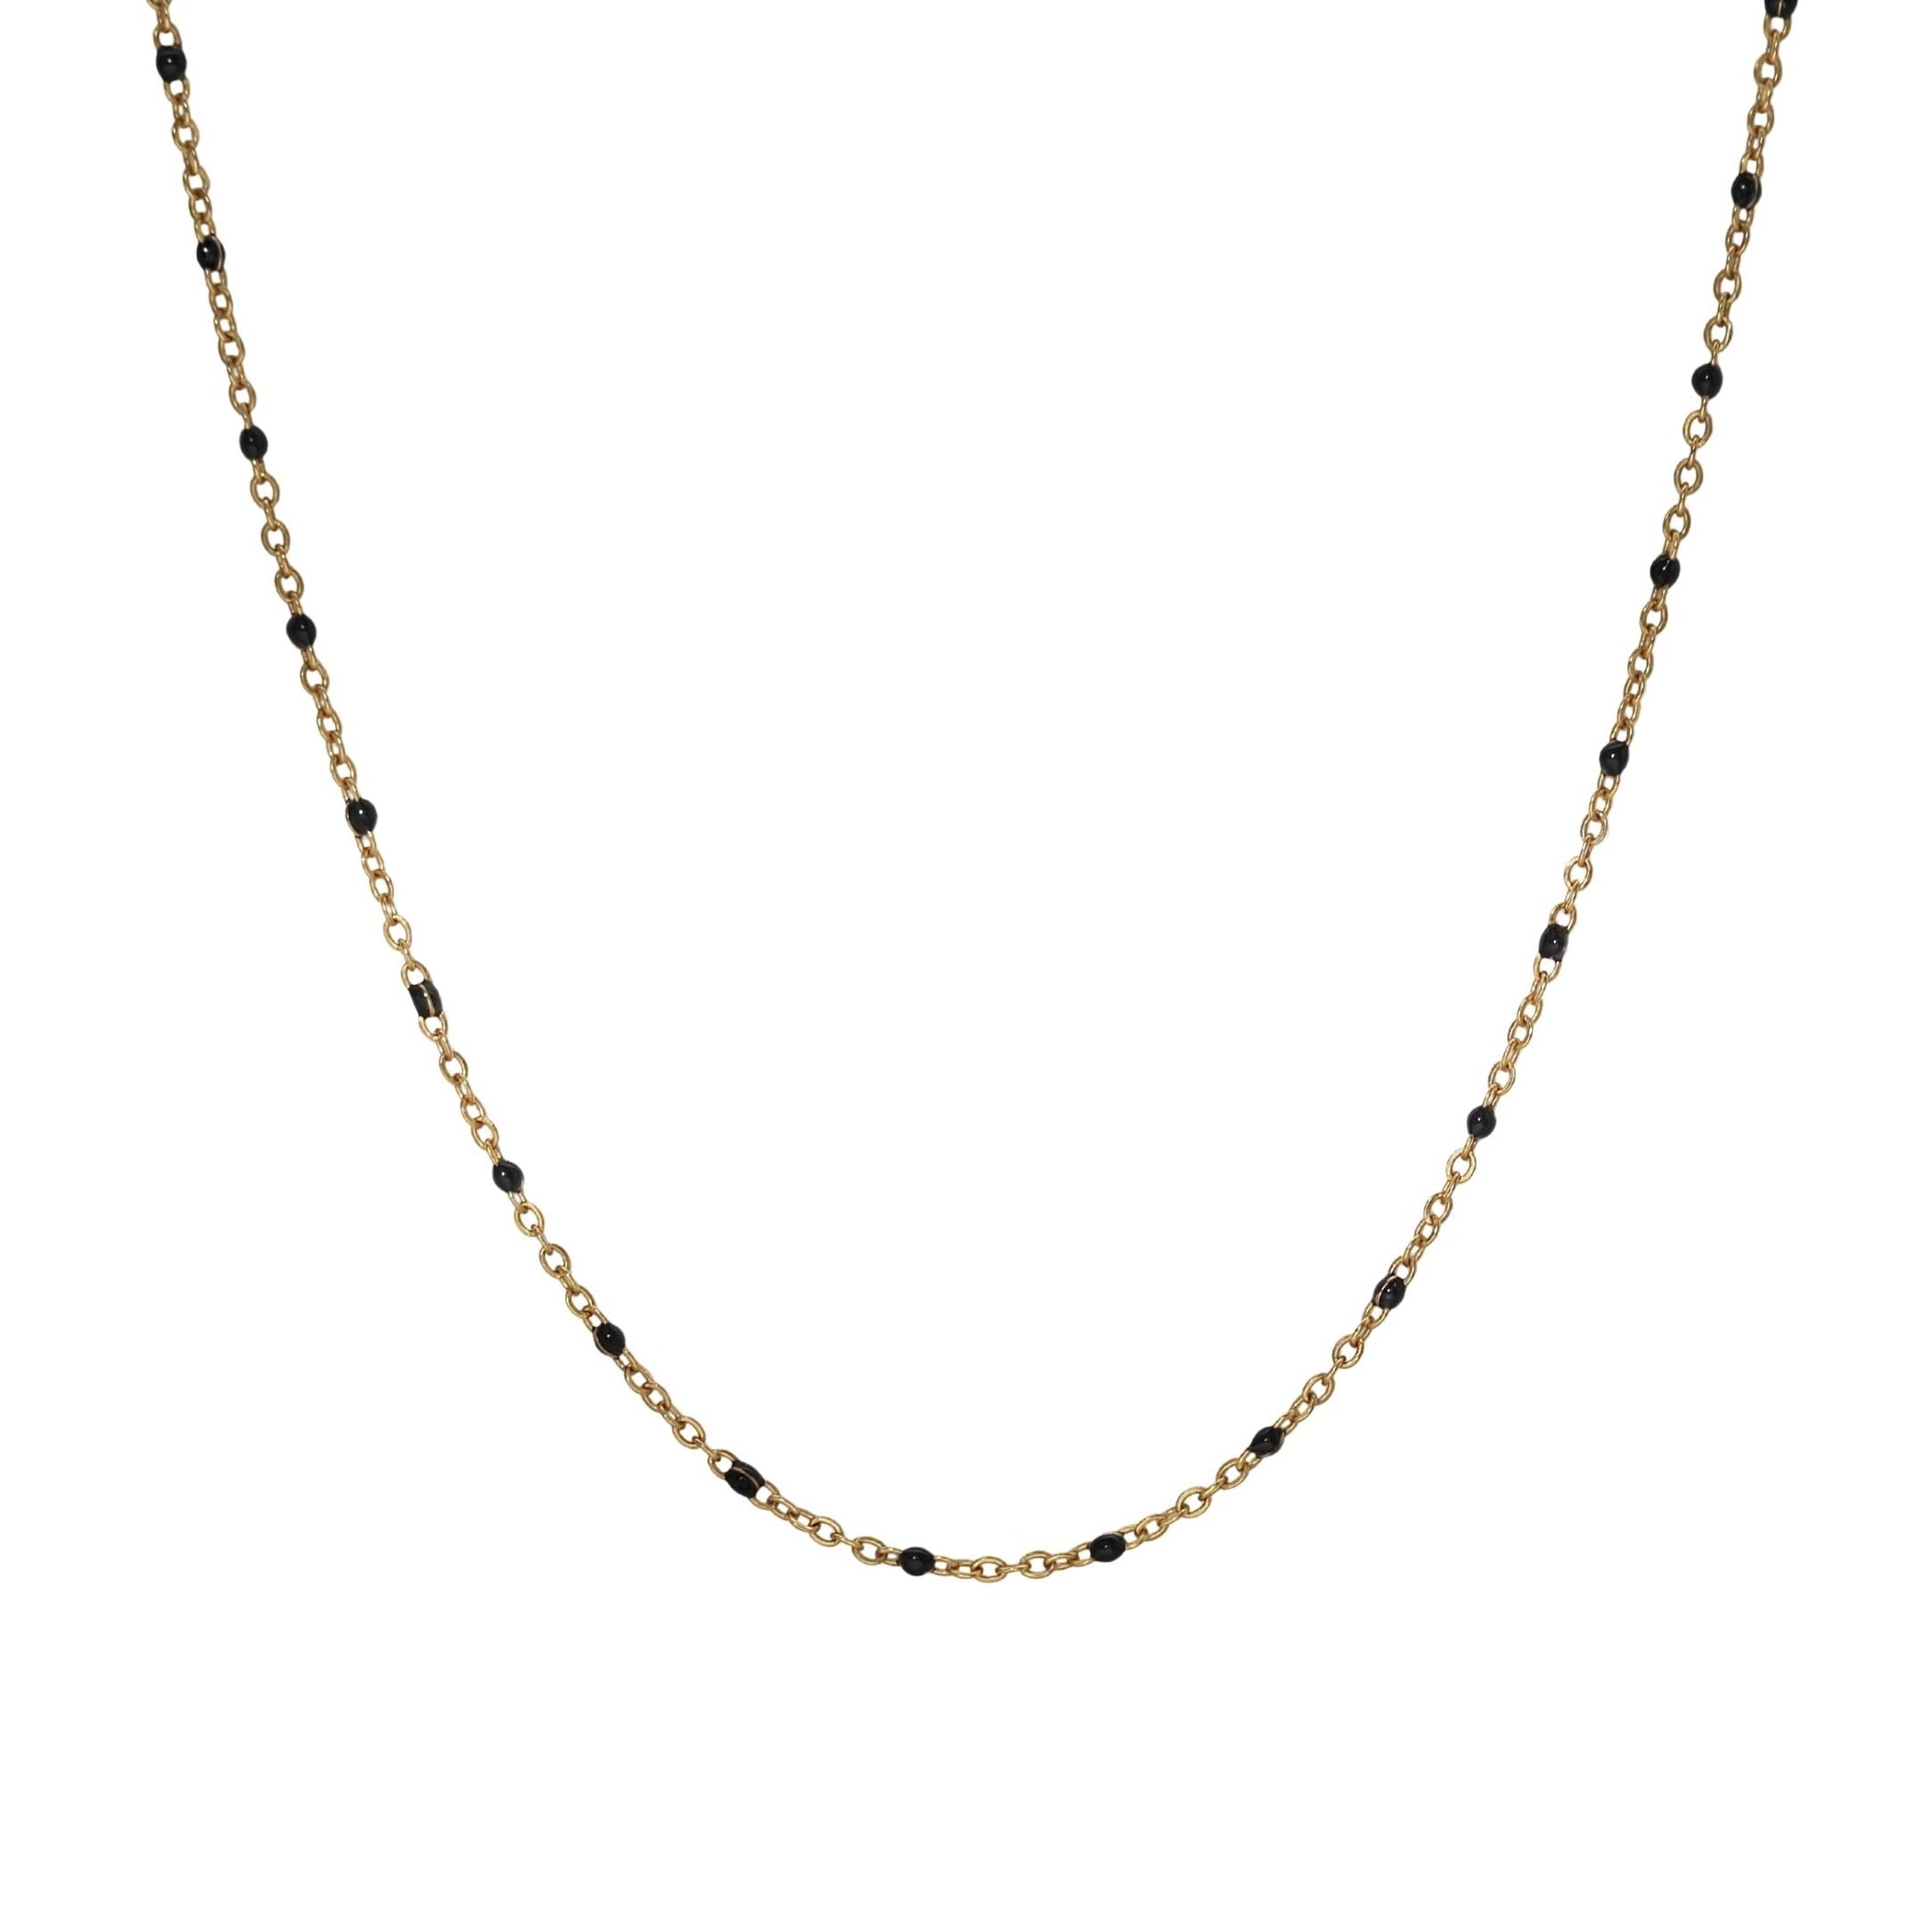 Enamel Dotted Necklace